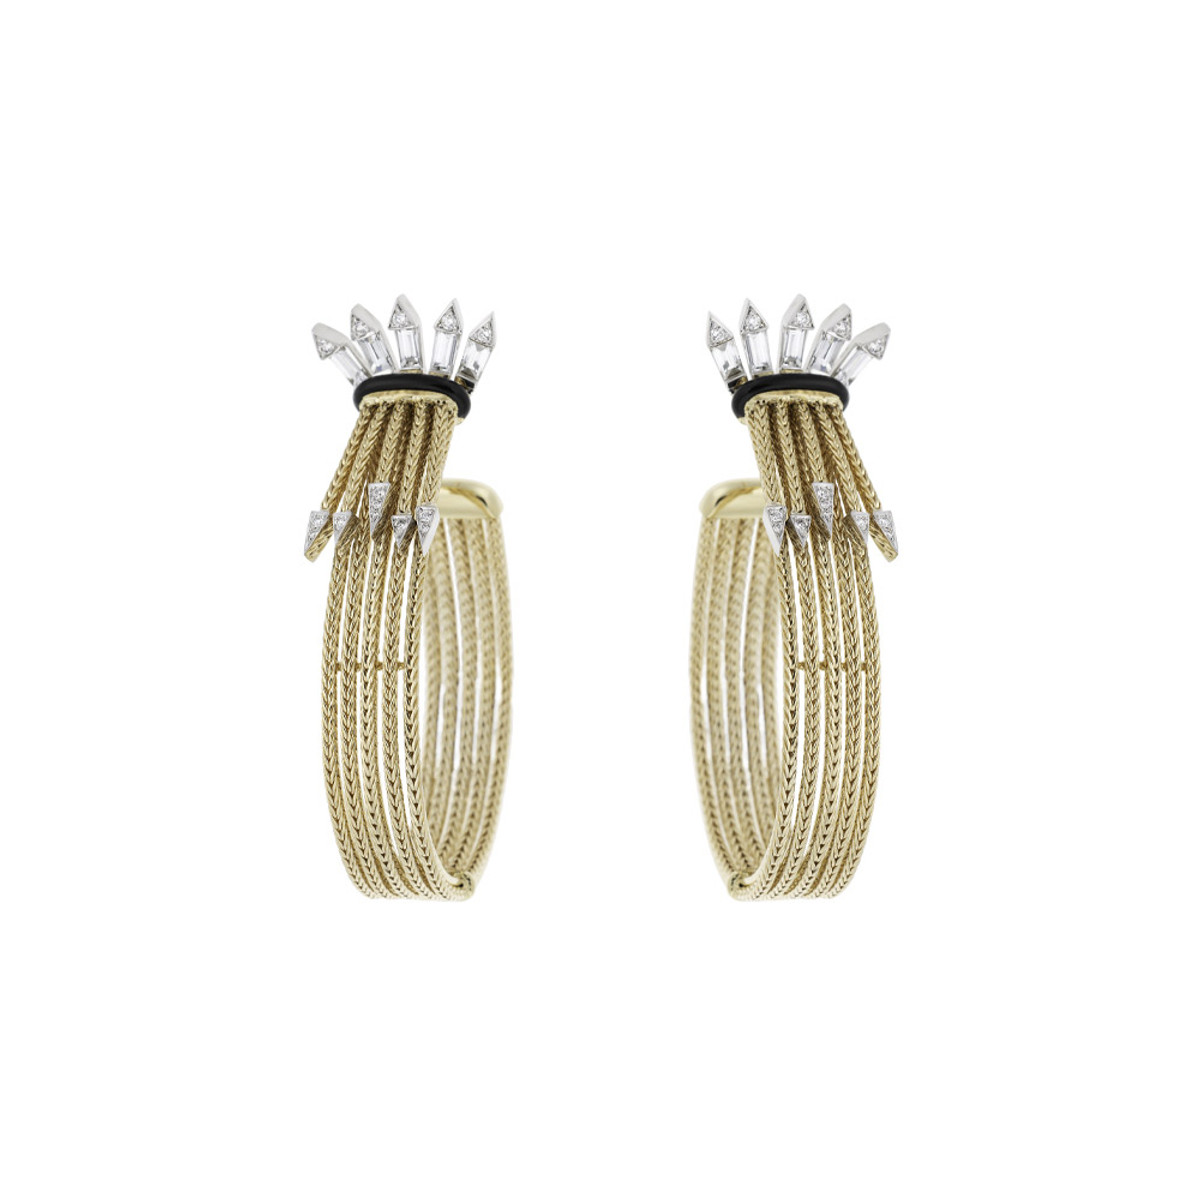 Nikos Koulis 18K White and Yellow Gold Together Diamond Earrings-57886 Product Image